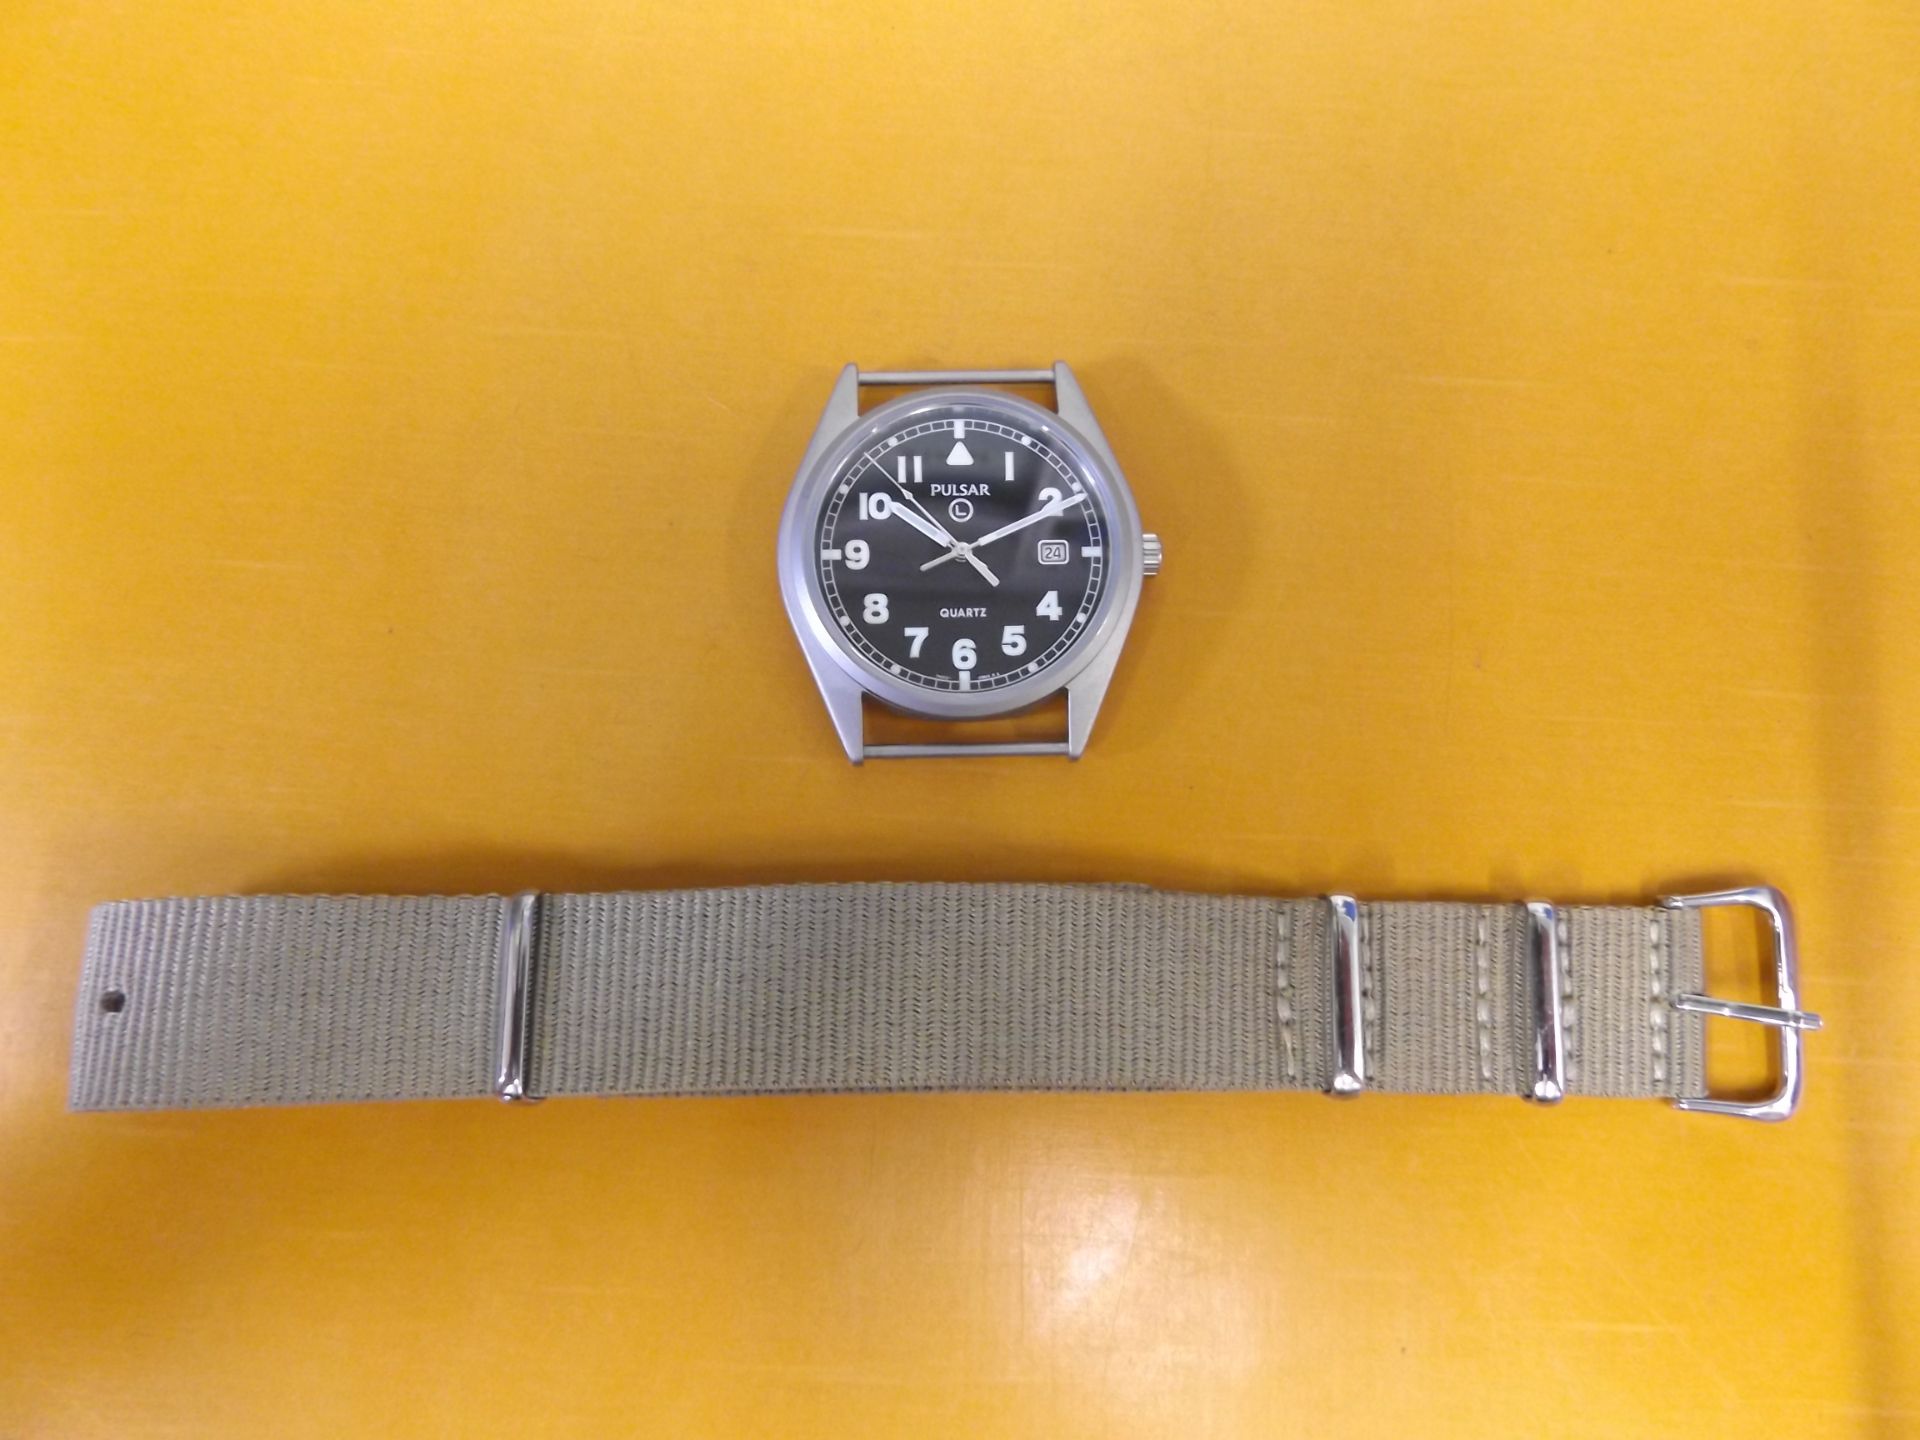 Pulsar G10 Wrist Watch - Afghan Issue - Image 5 of 8